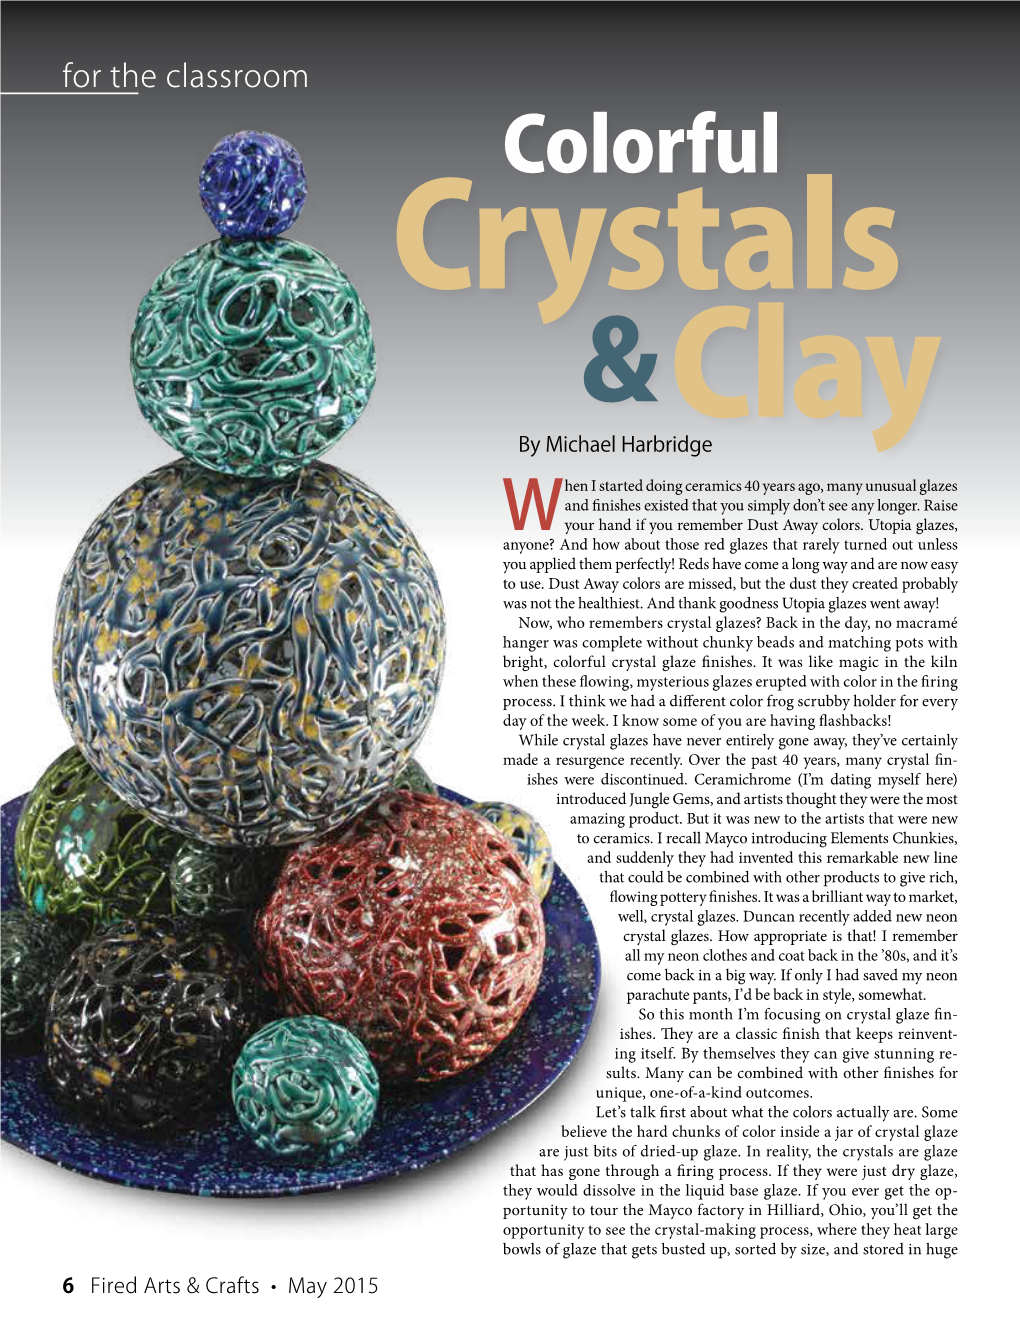 Colorful Crystals & by Michael Harbridgeclay Hen I Started Doing Ceramics 40 Years Ago, Many Unusual Glazes and Finishes Existed That You Simply Don’T See Any Longer